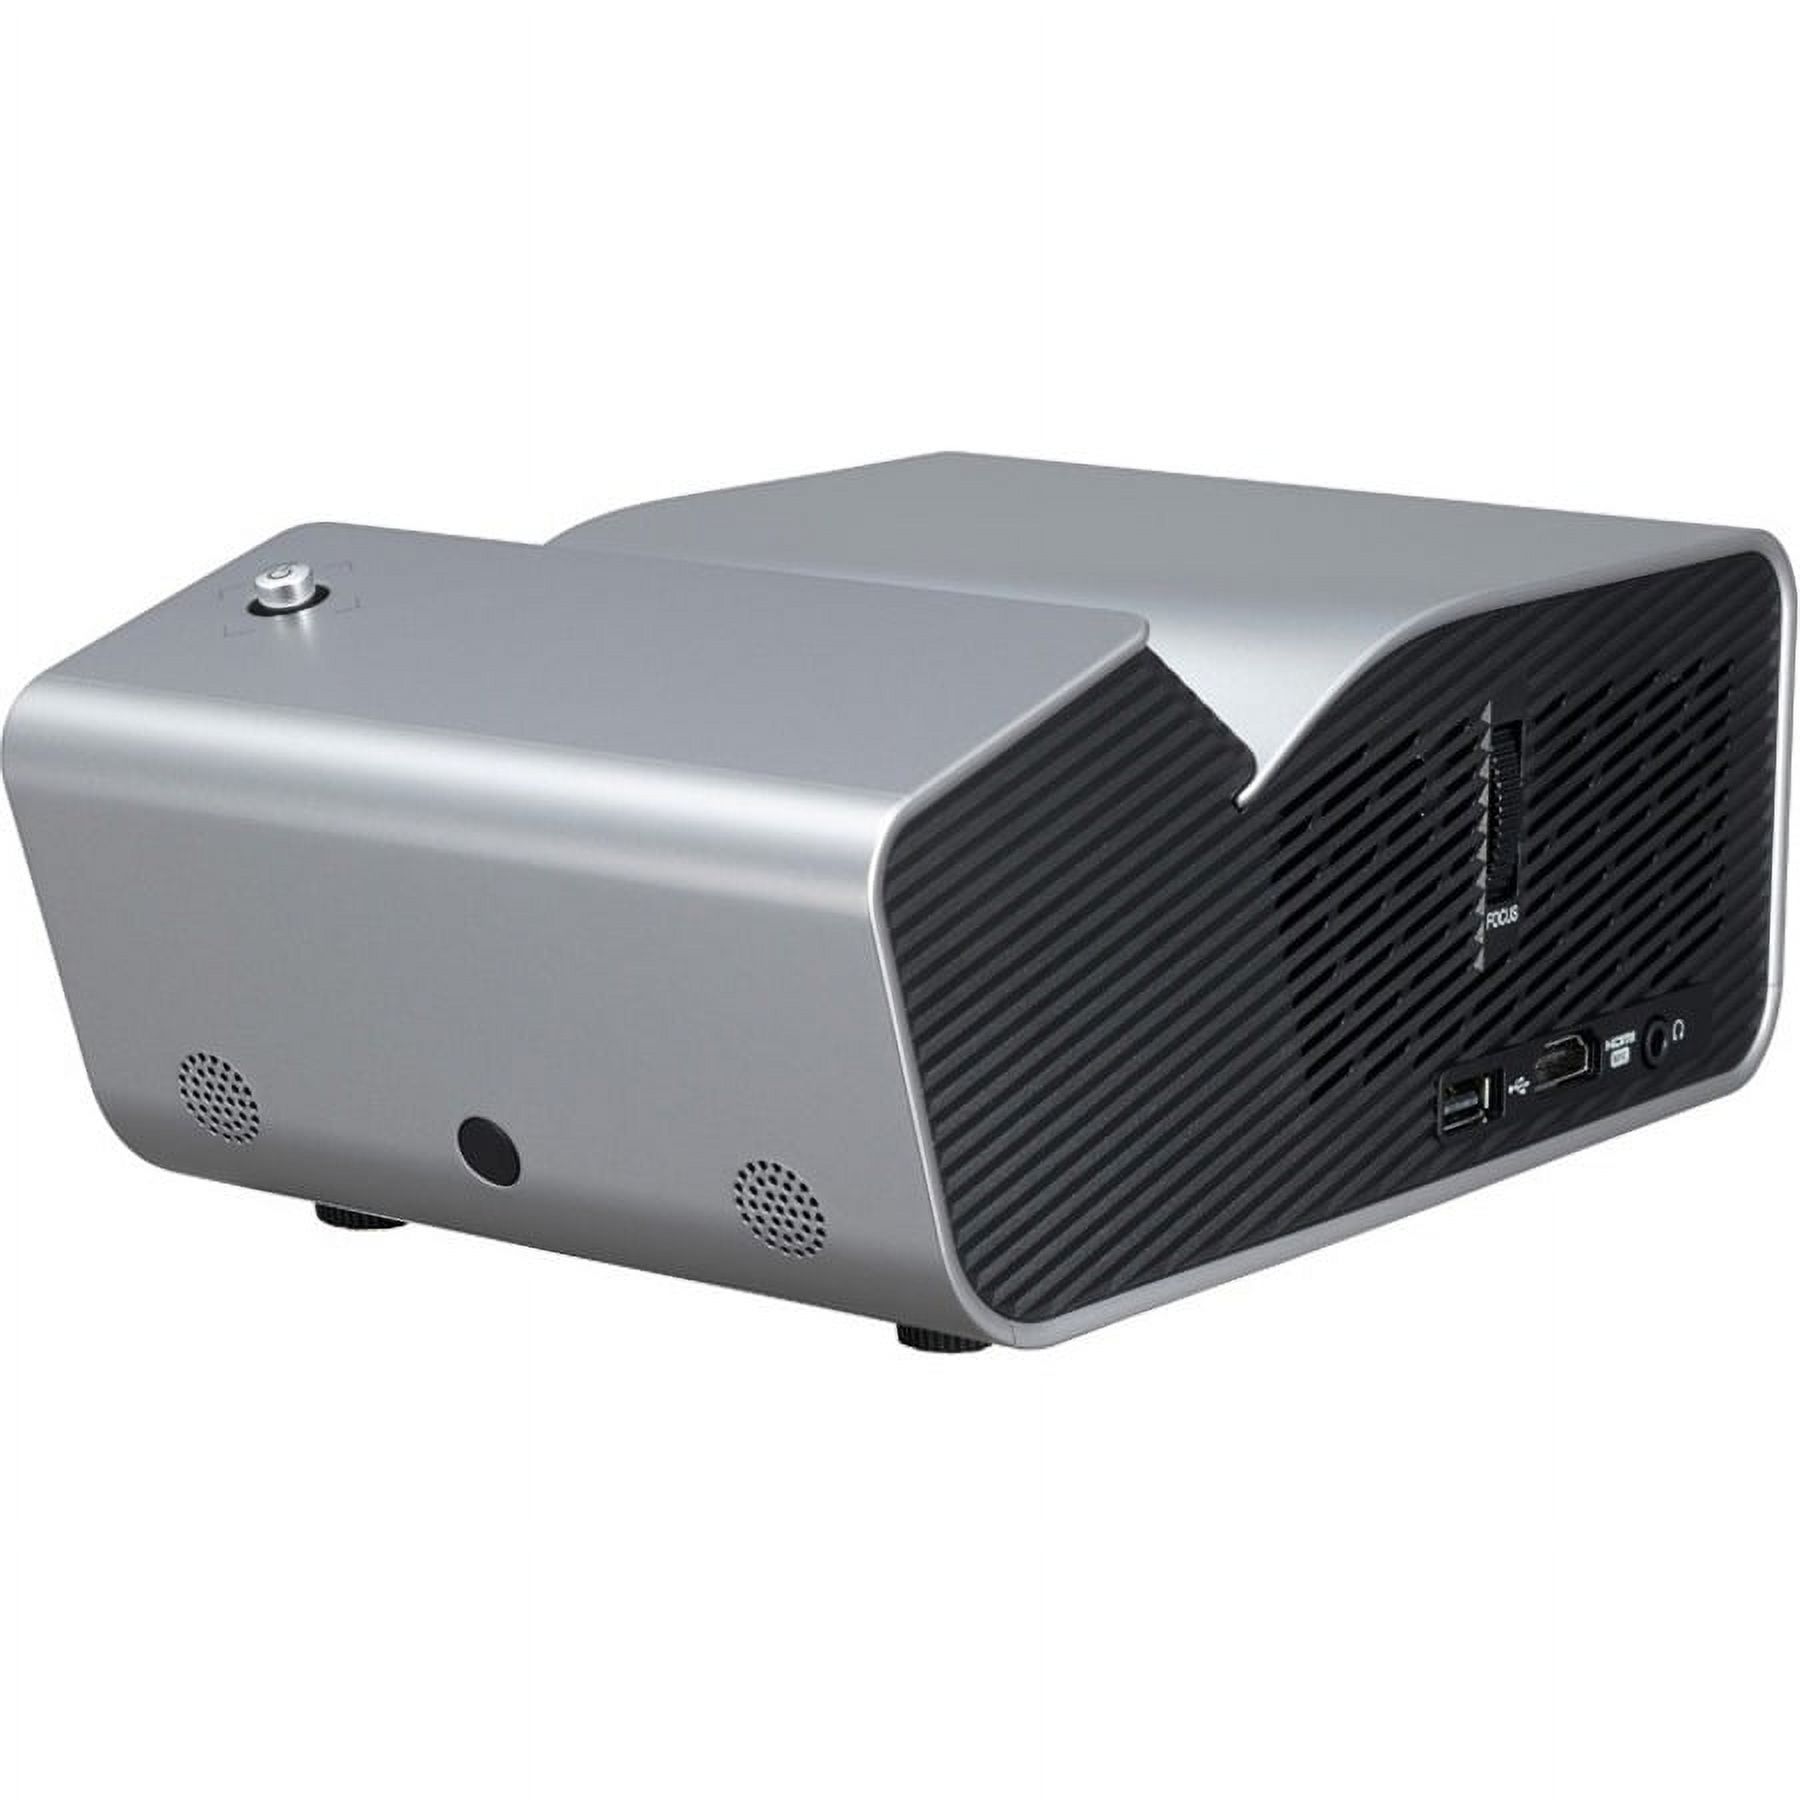 LG PH450UG Ultra Short Throw Projector with Built-in Battery - image 5 of 8